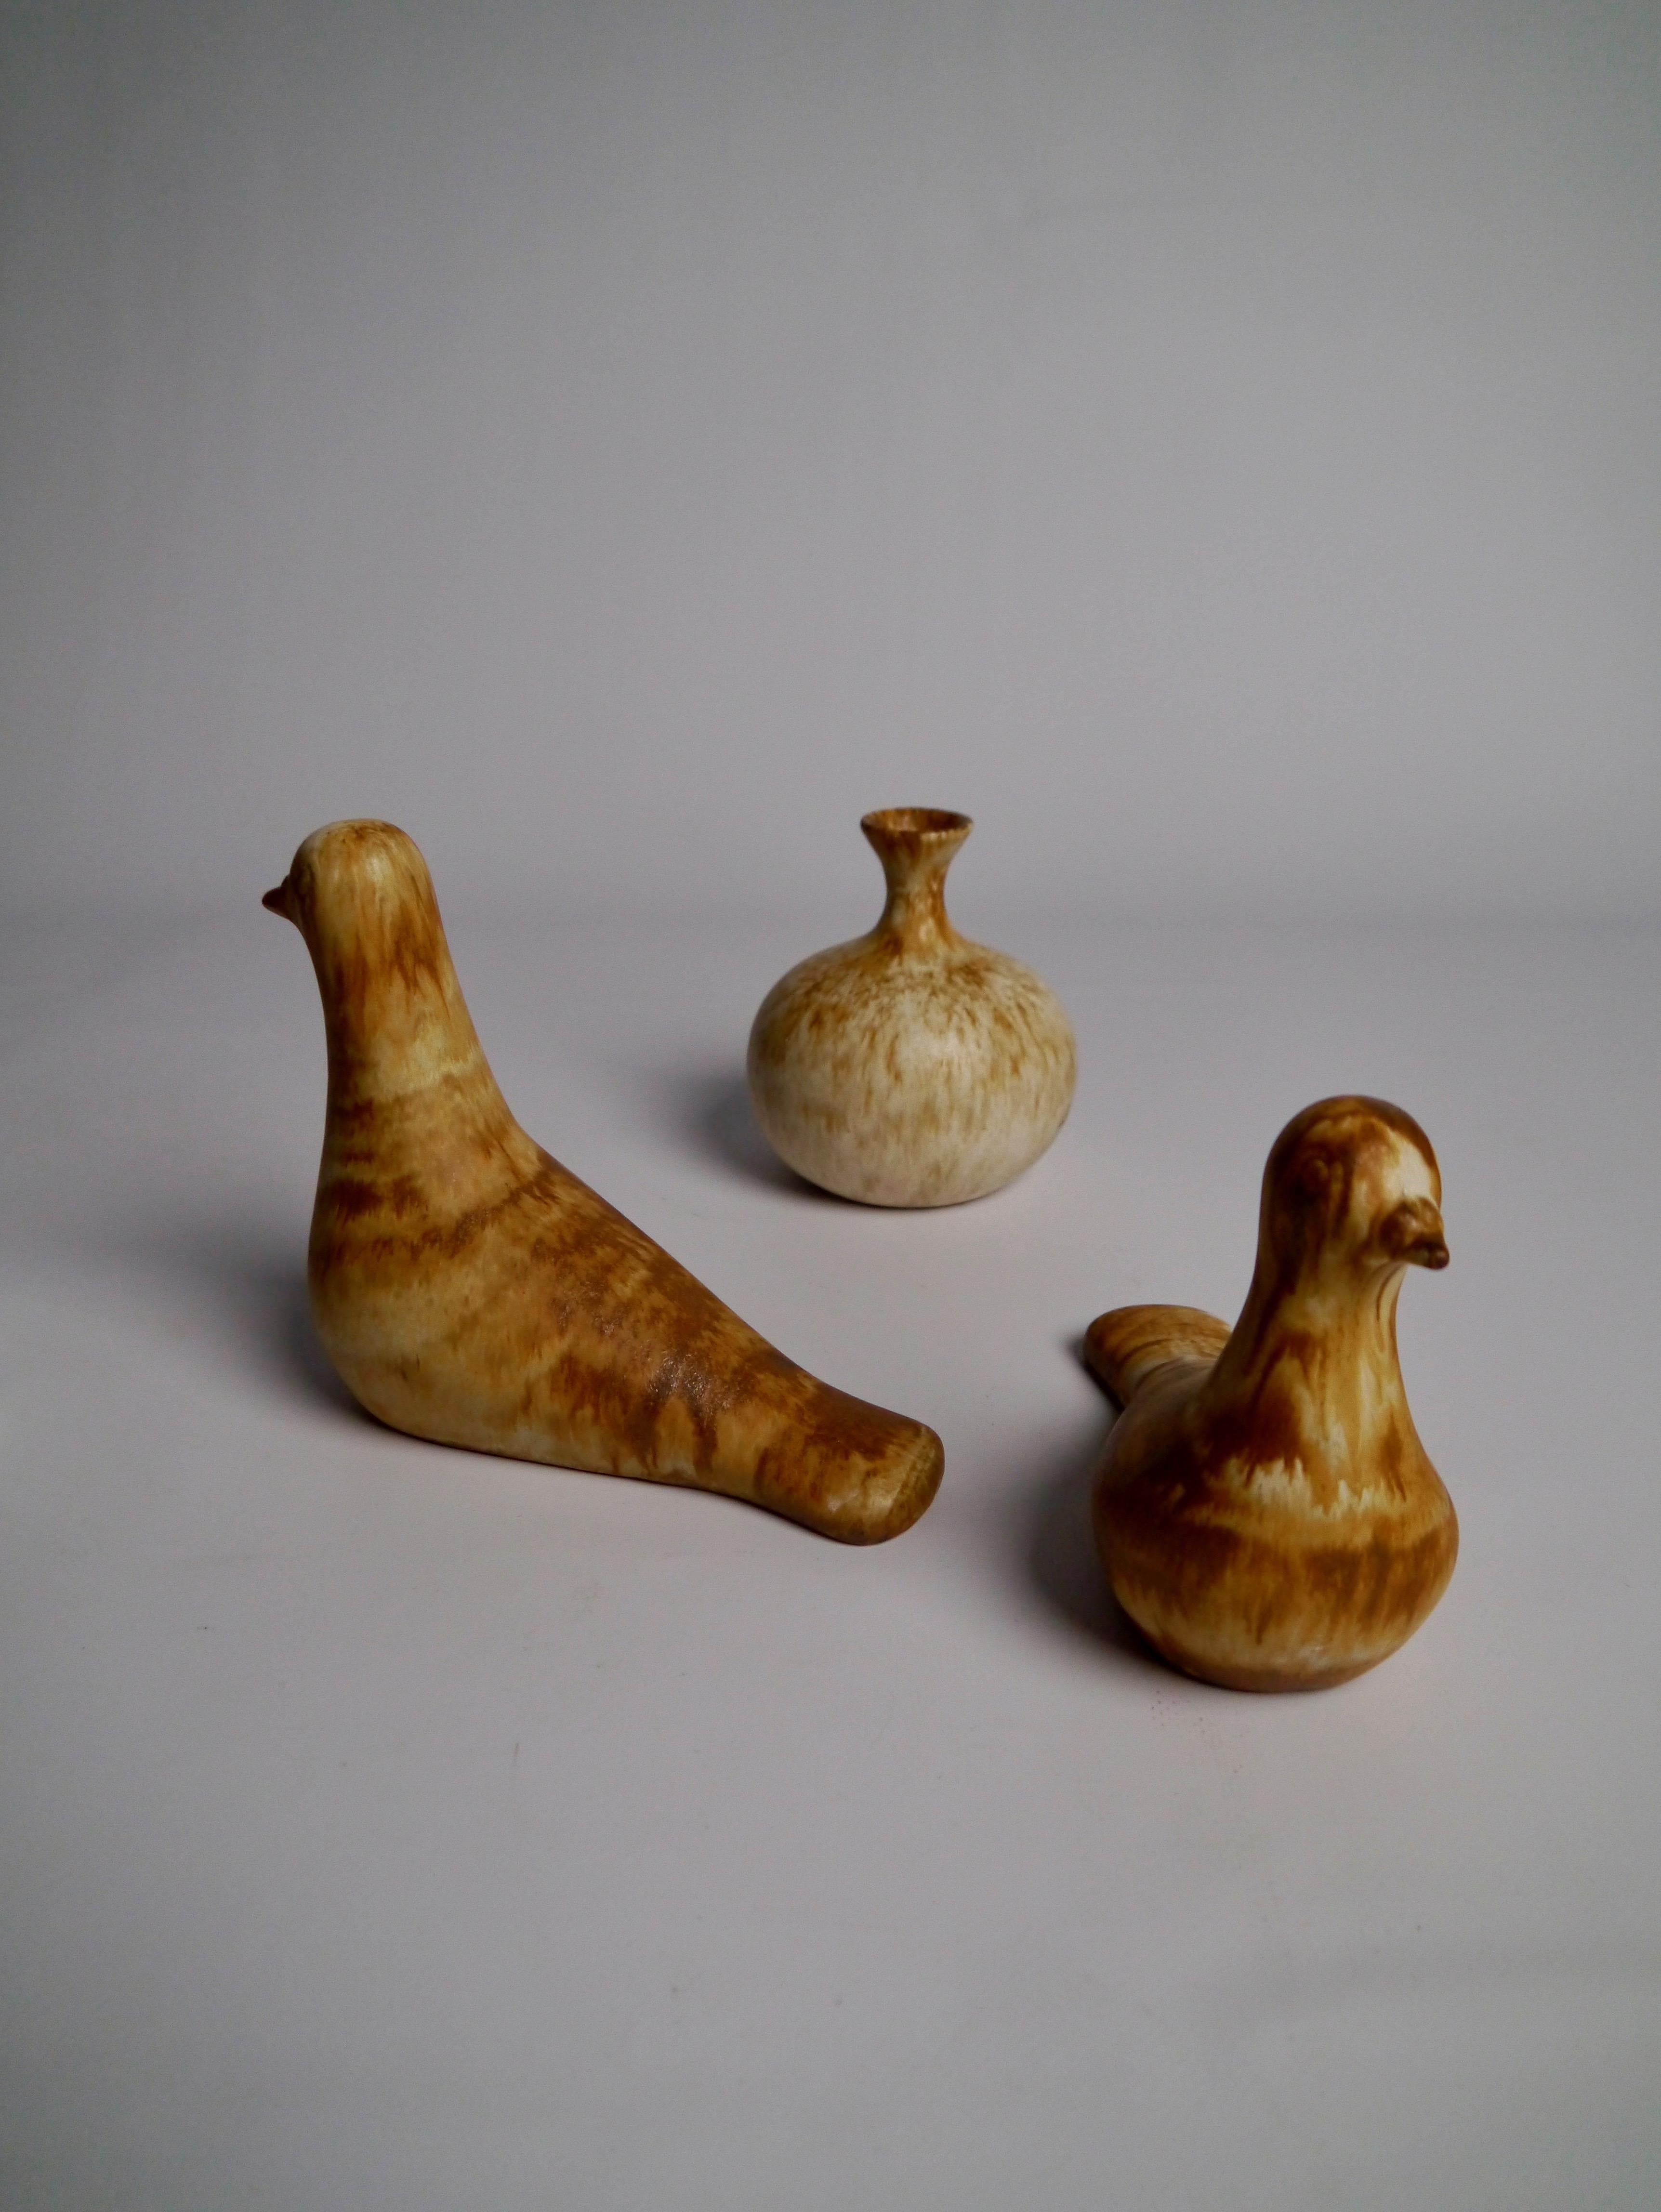 Set consisting of two ceramic bird figures and one ceramic vase, all manufactured at EGO Stengods (1966-1988)  in Lidköping, Sweden 1970s. Vase hand-thrown and signed 